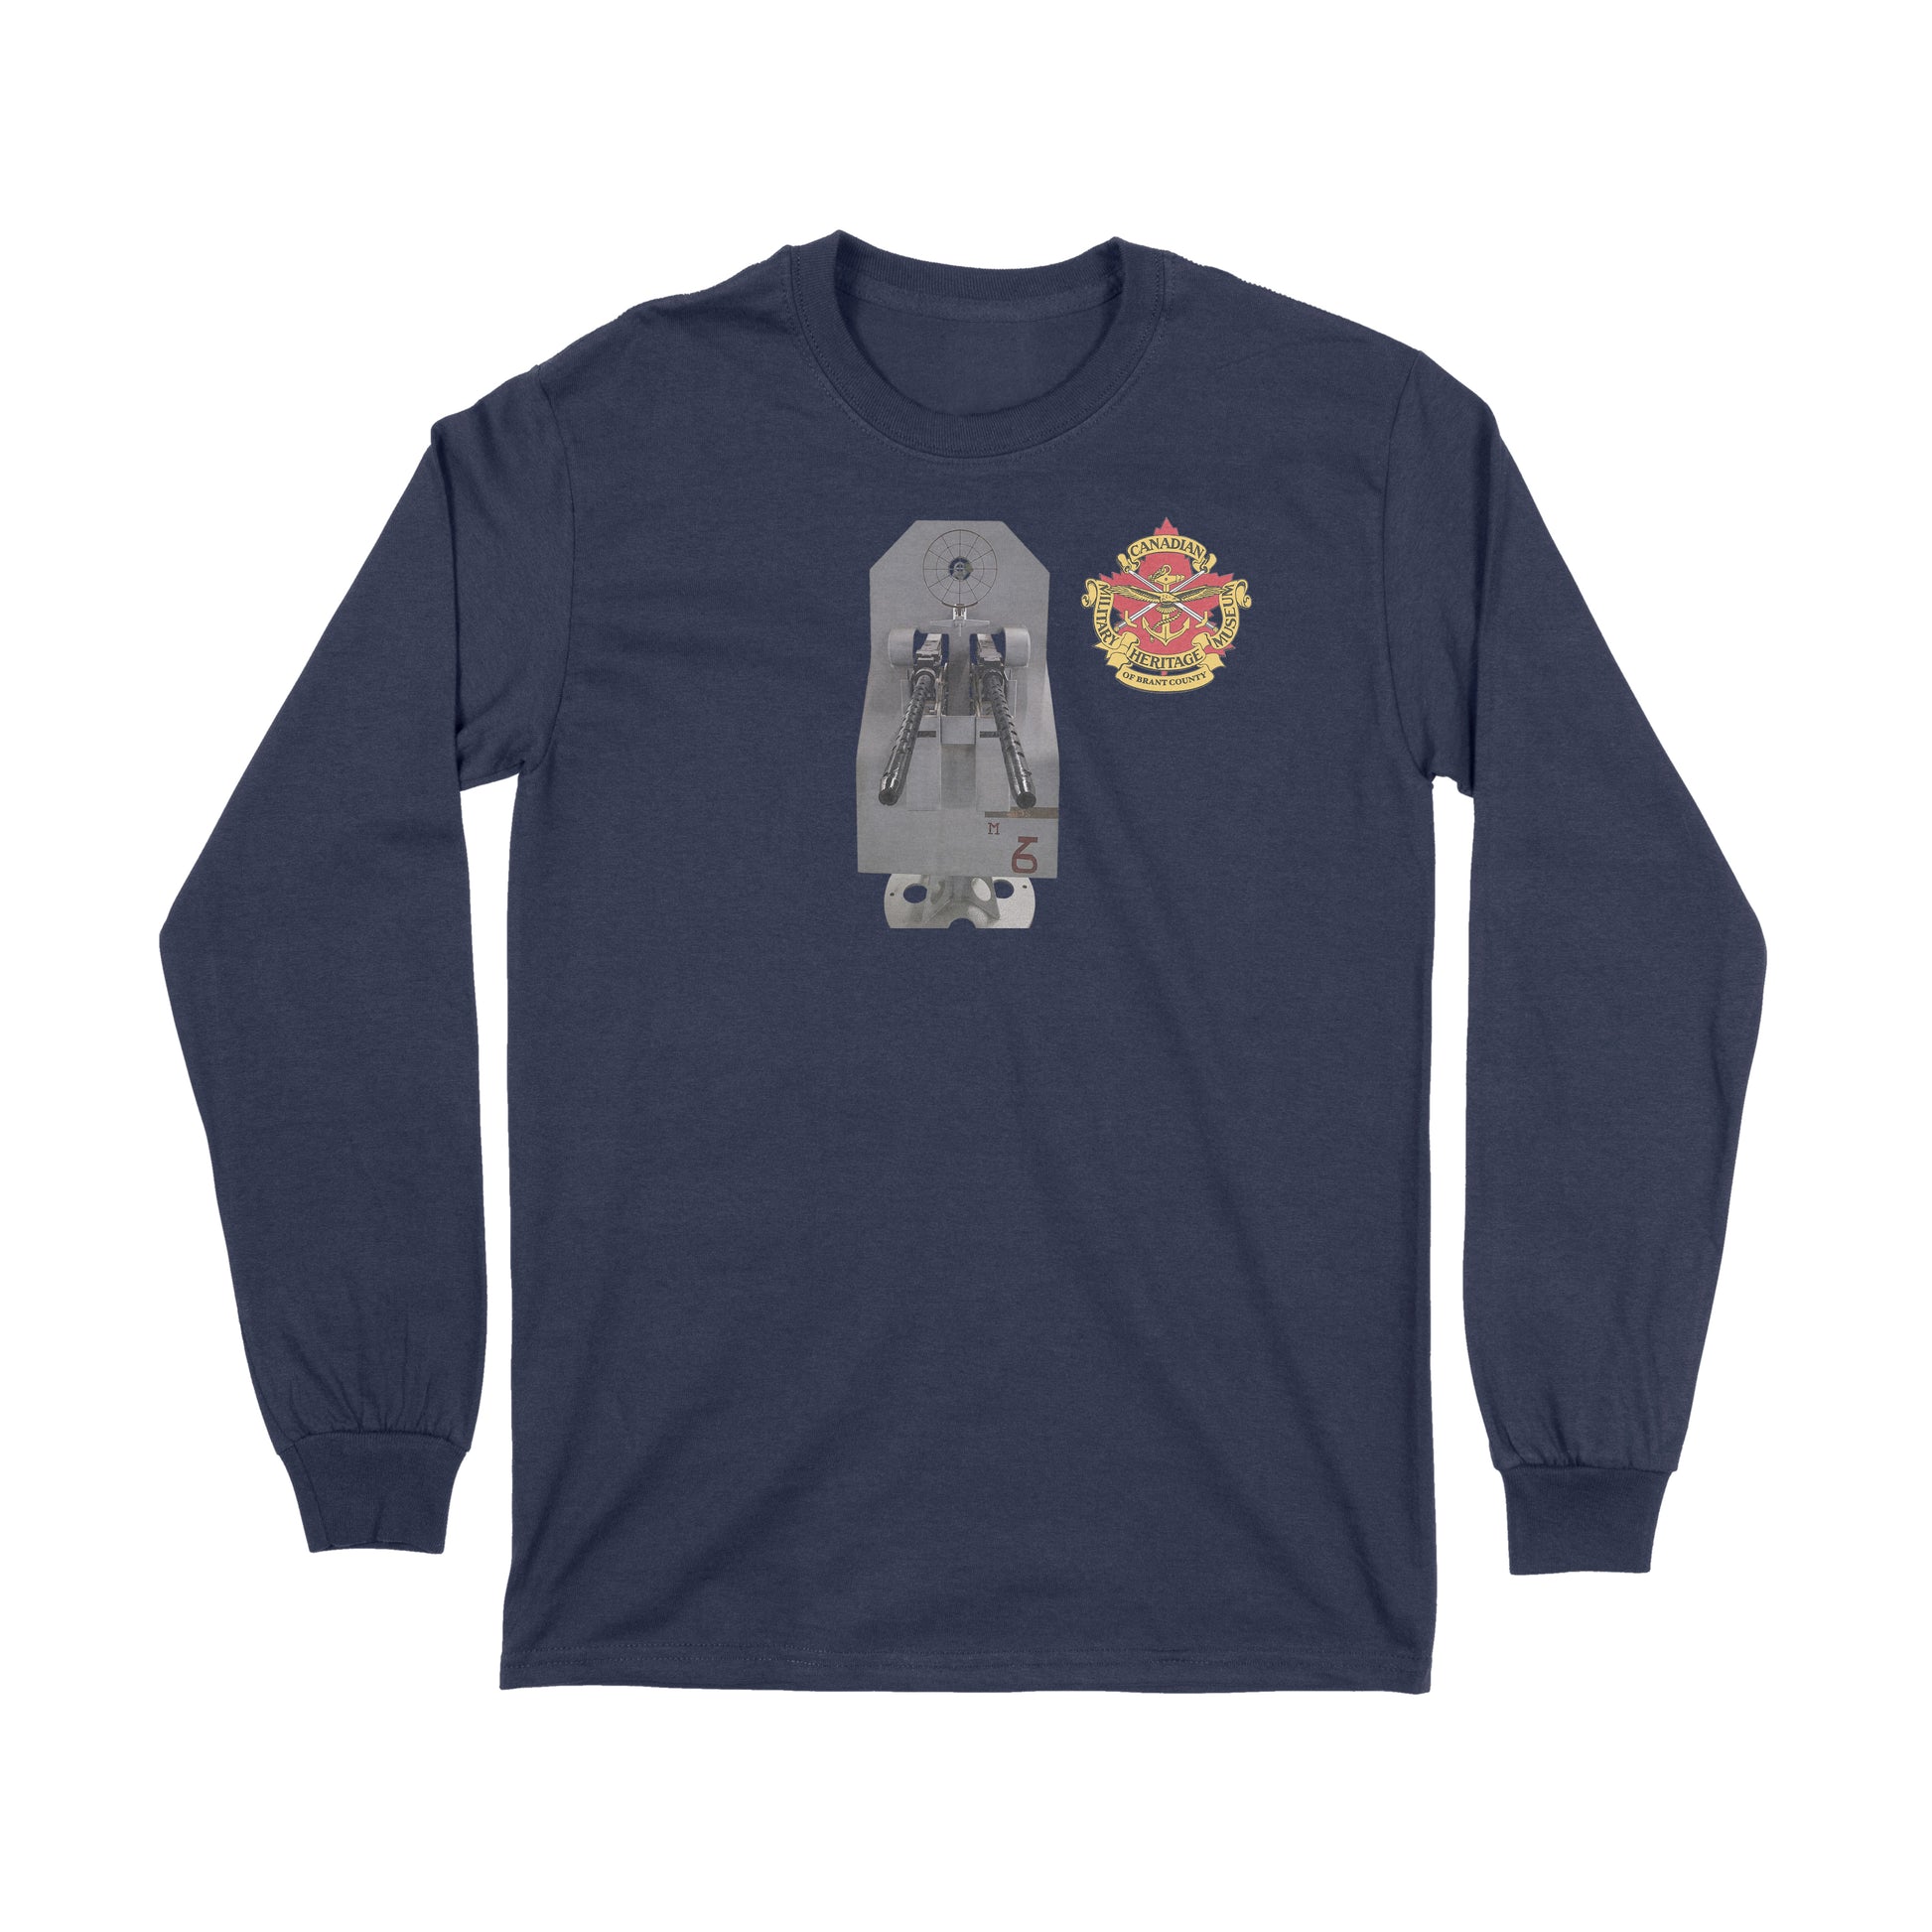 Brantford, Canadian Military Heritage Museum, Fat Dave, Long Sleeve, Museum, Ships Gun, Navy Blue